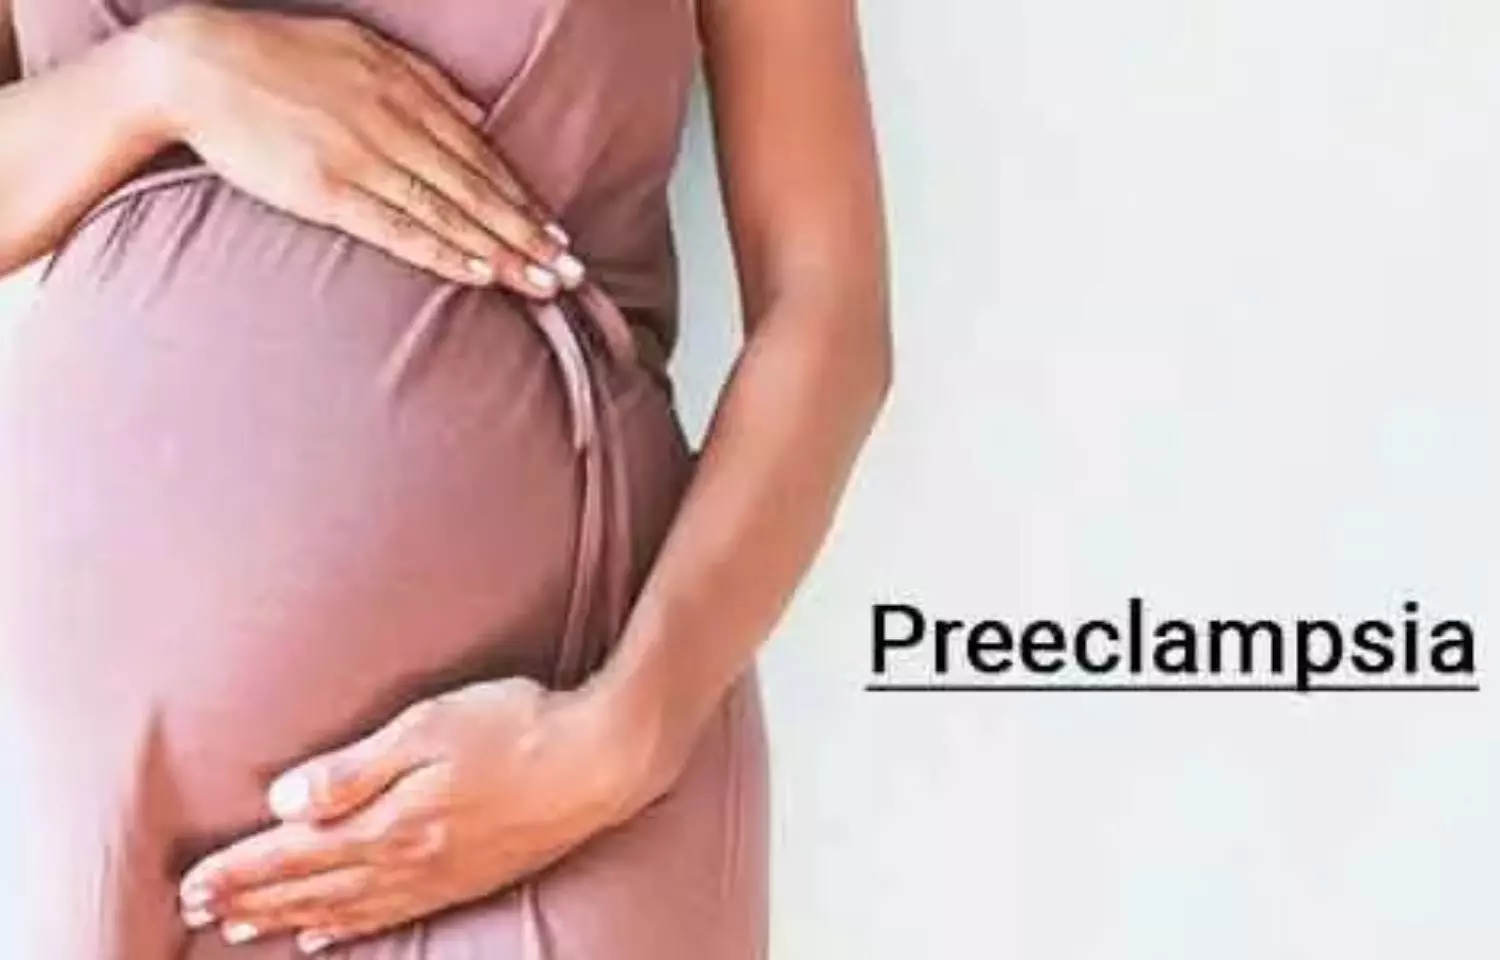 Mothers immune cells appear to exacerbate complications of preeclampsia